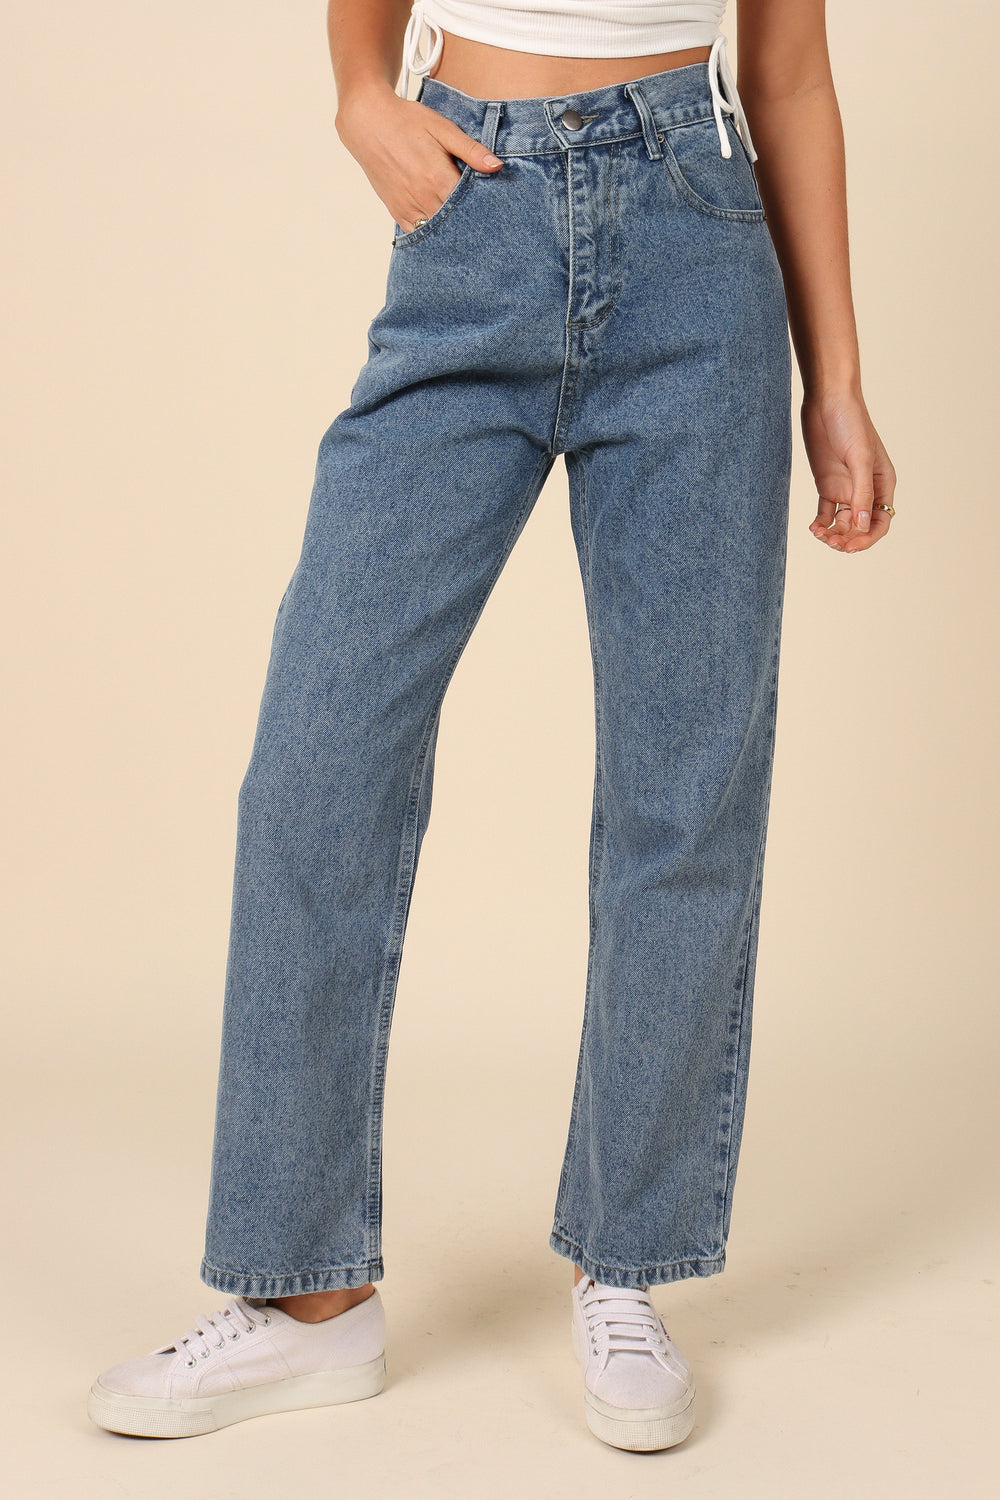 BOTTOMS Francis Straight Leg Jeans - Mid Blue Wash